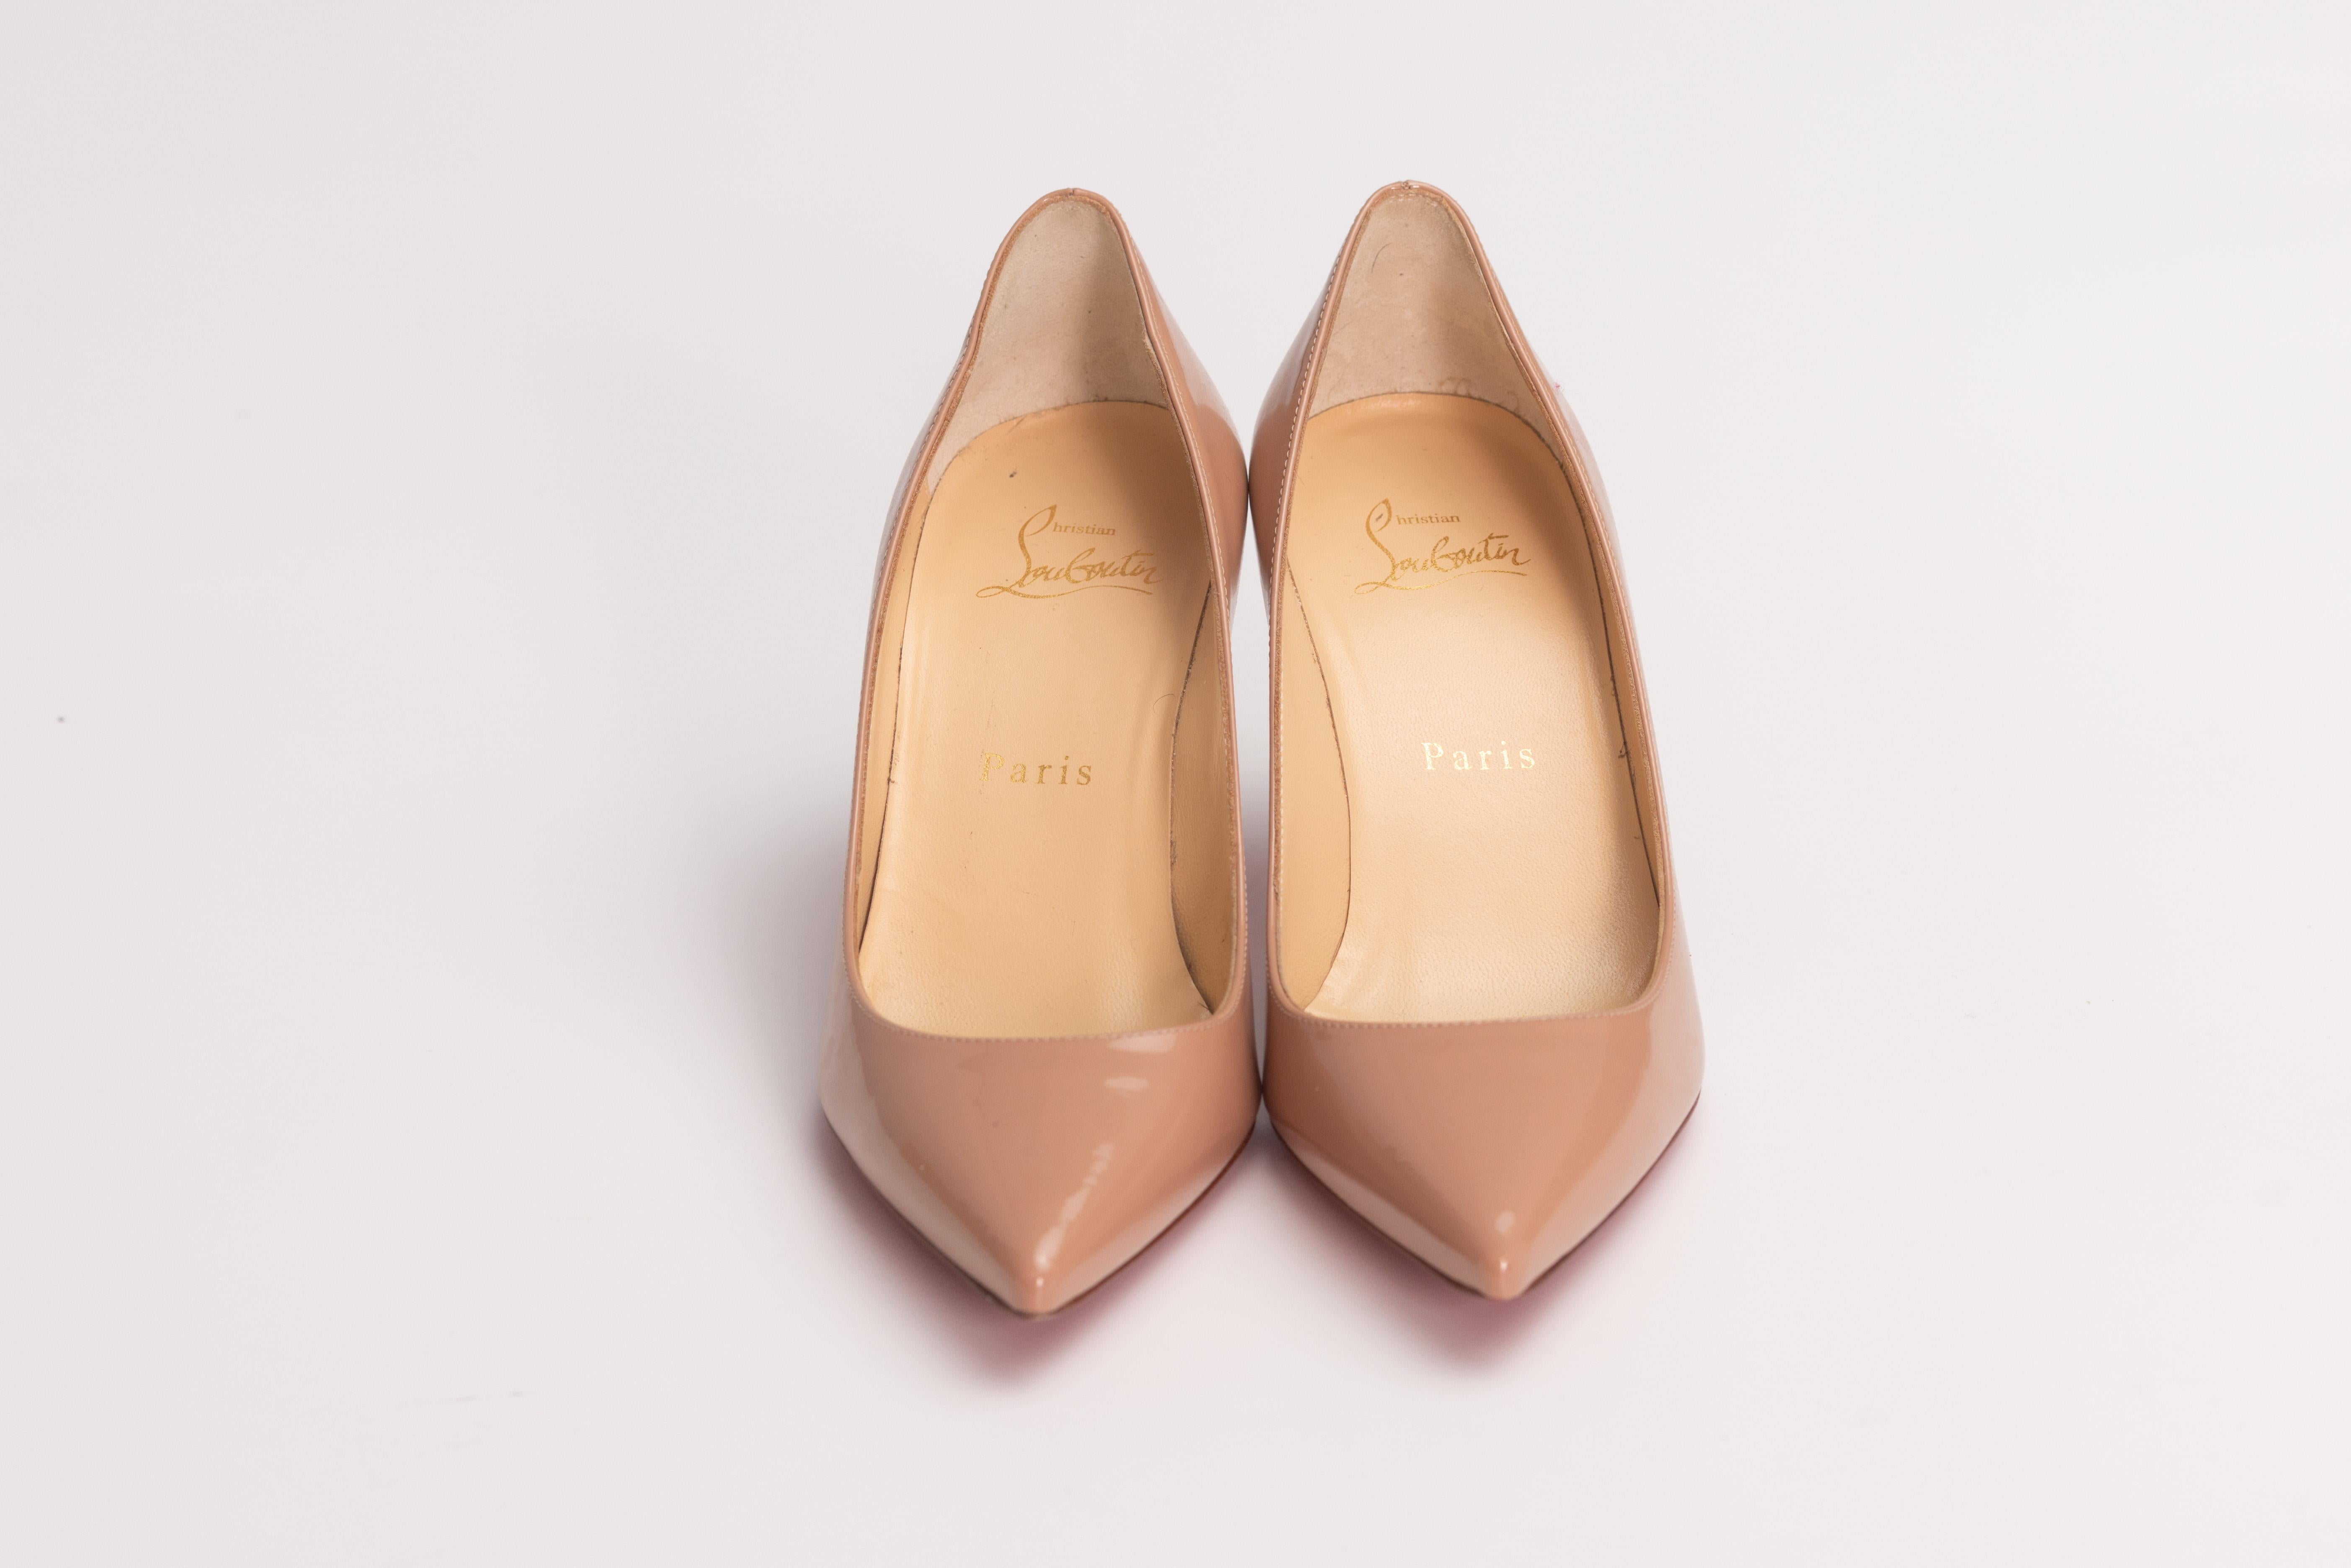 Christian Louboutin Beige Patent Pigalle Pointed Toe Heels (EU 35.5) In Good Condition For Sale In Montreal, Quebec